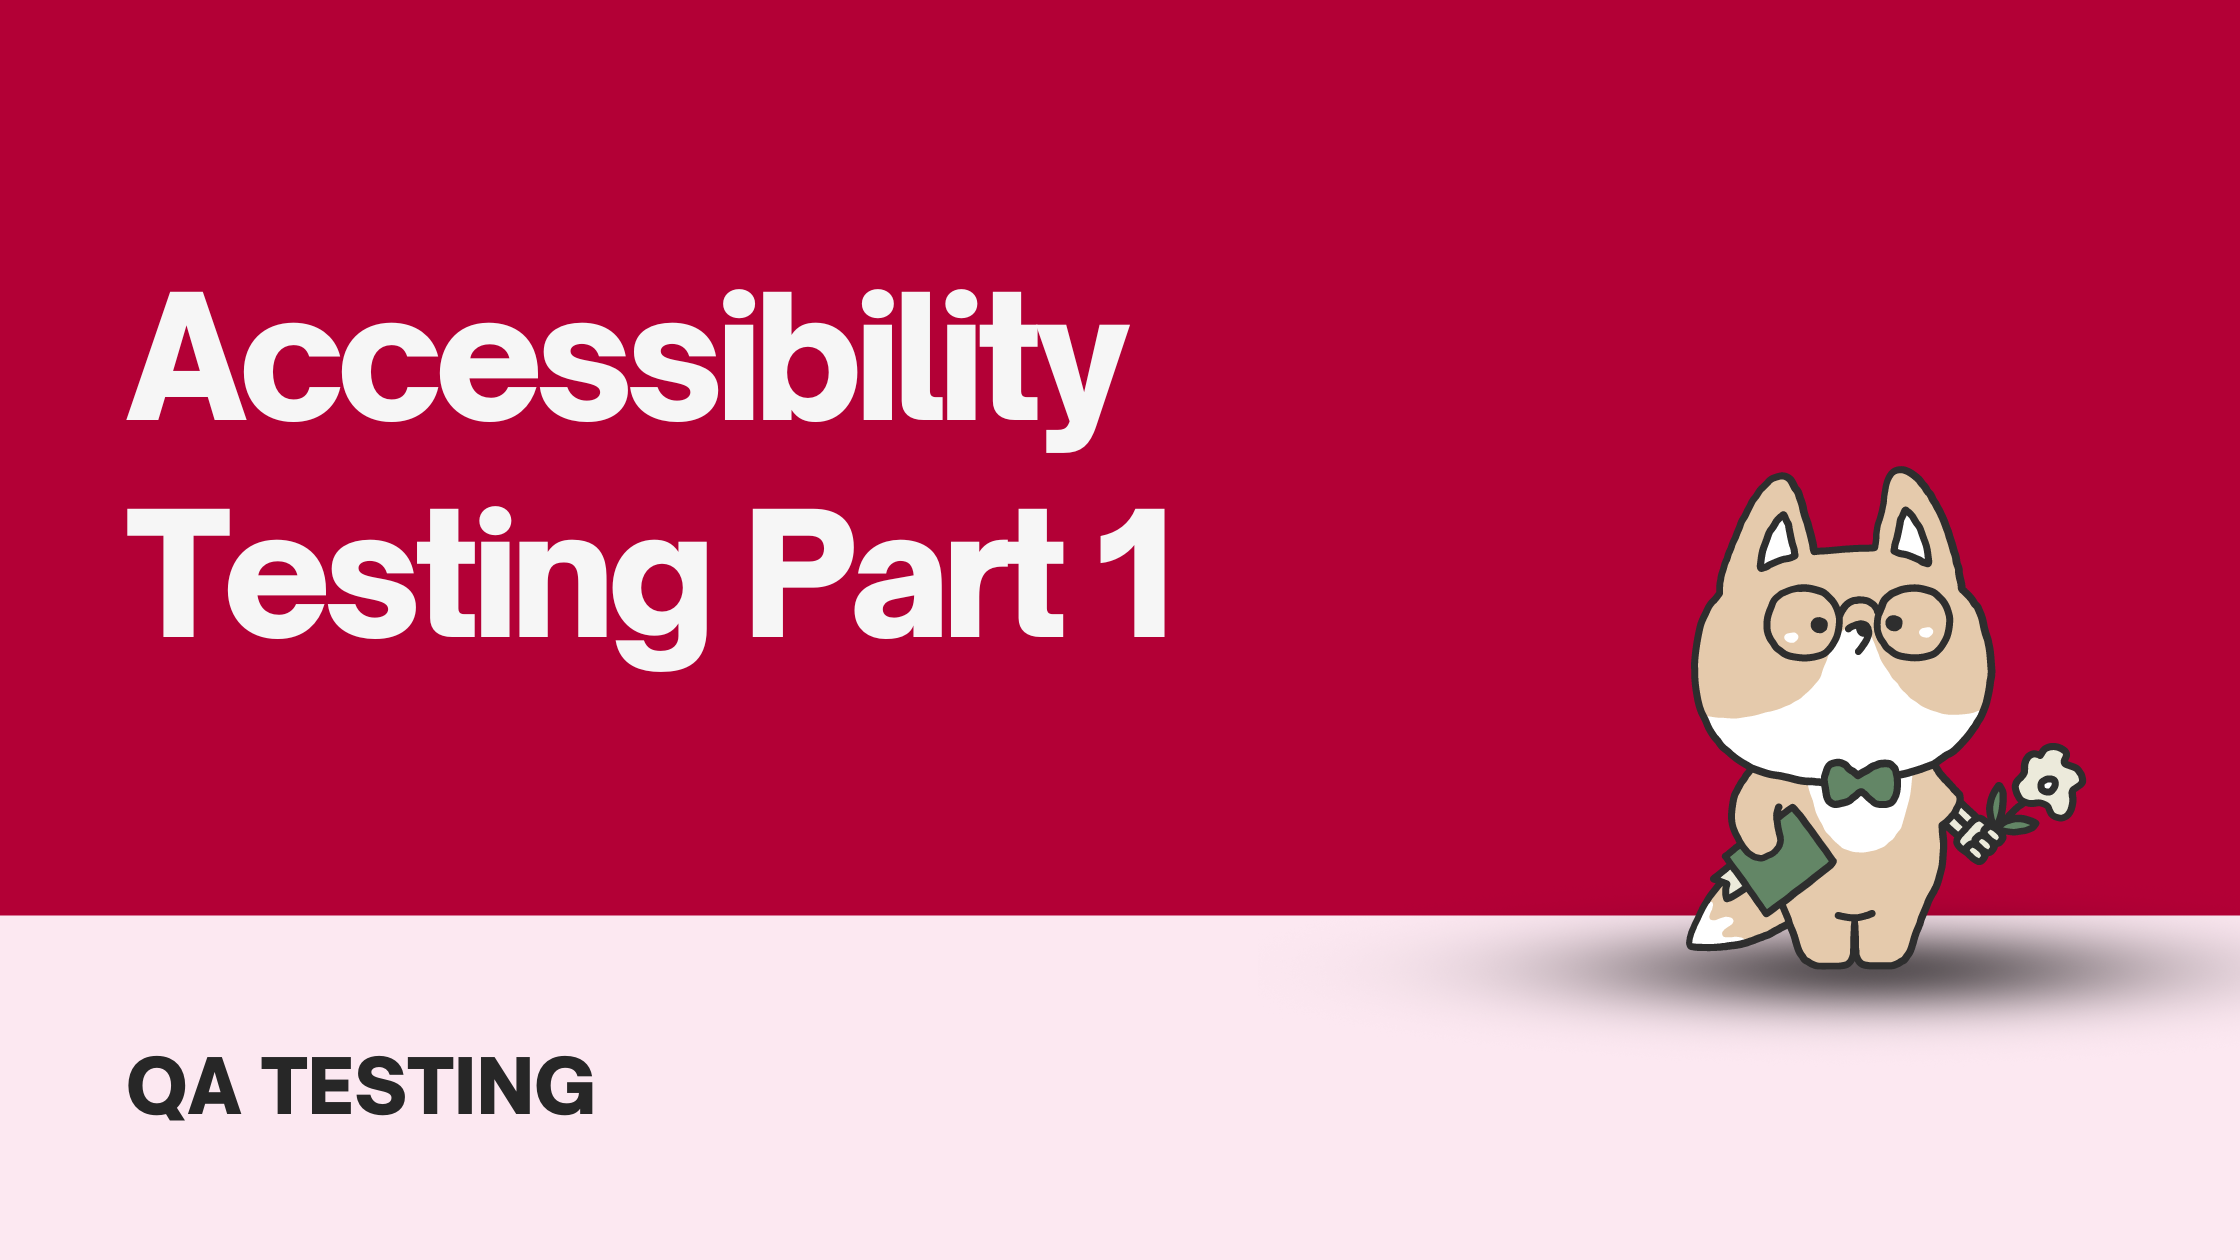 Accessibility Testing Part 1